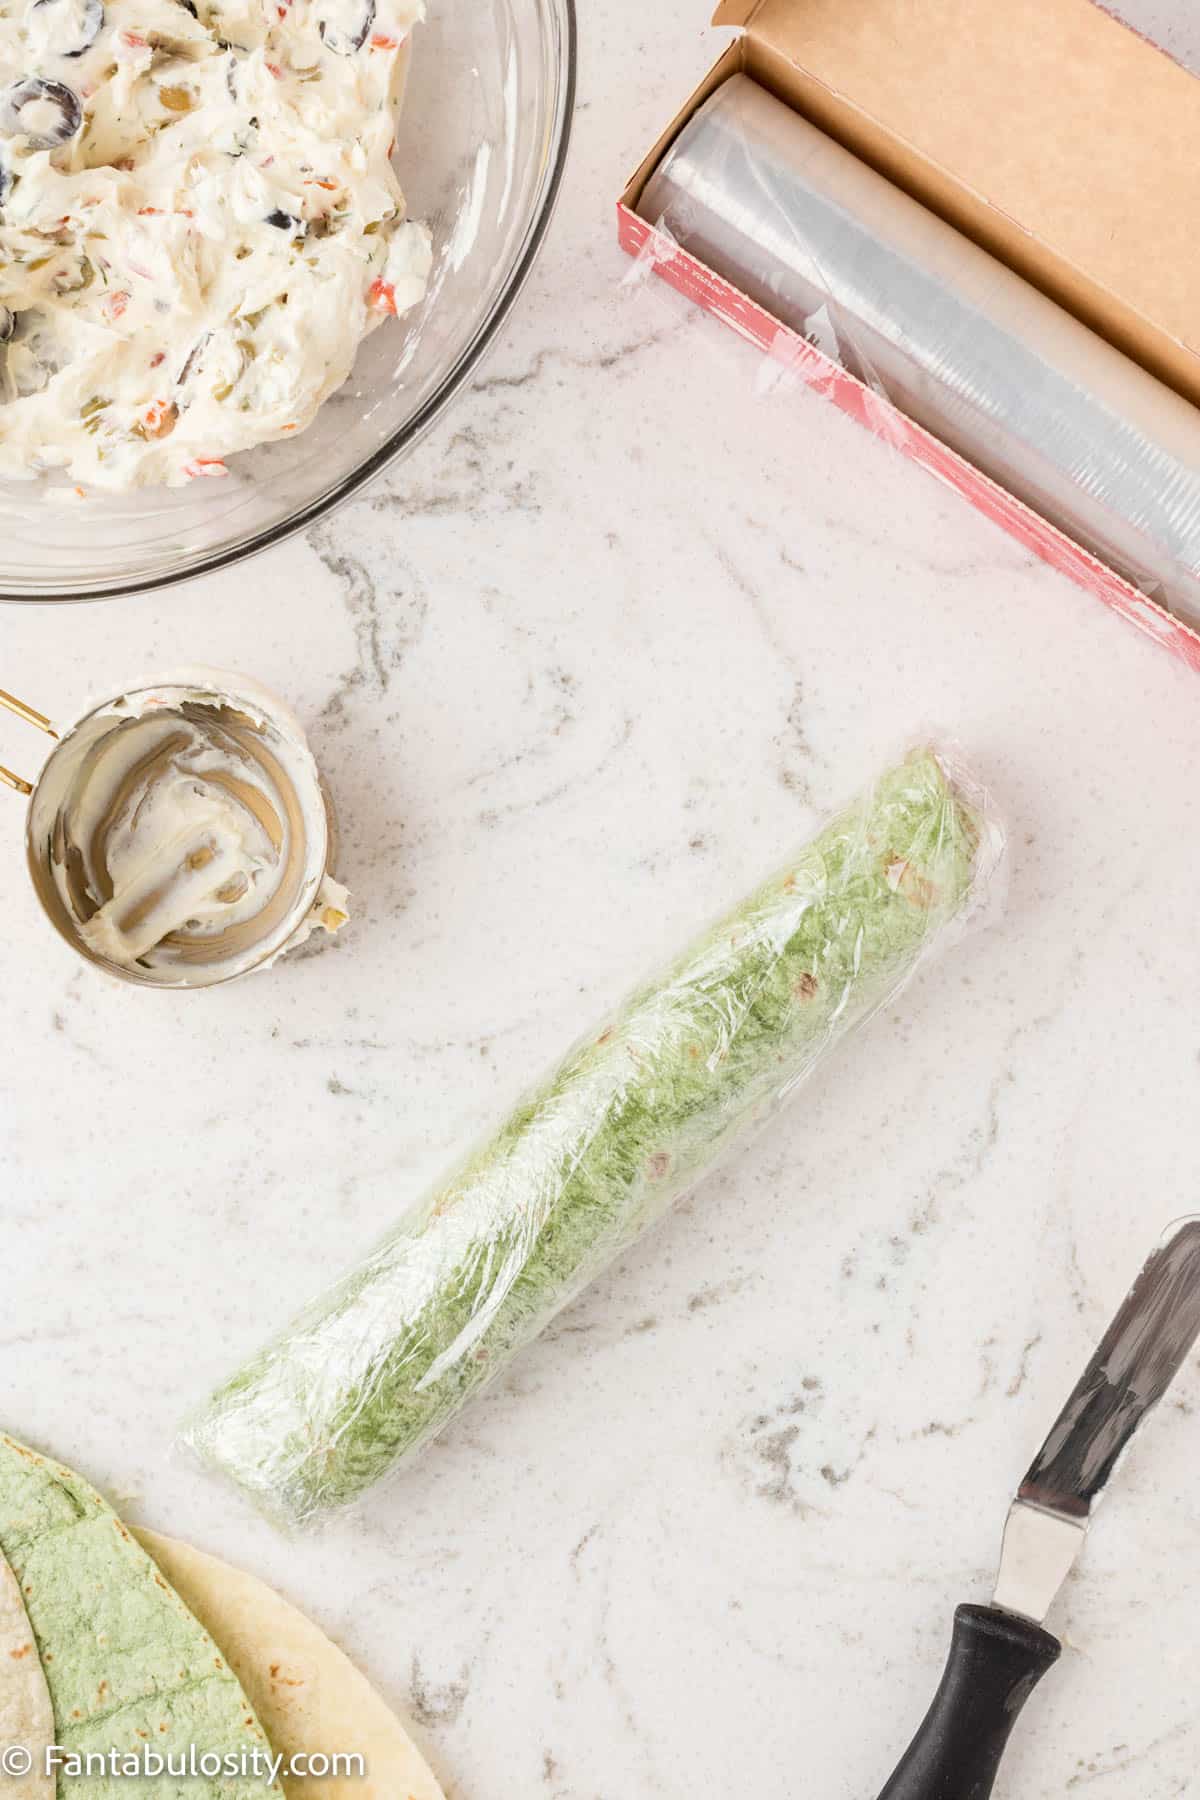 A spinach tortilla spread with a savory olive cream cheese mixture has been rolled up tightly and wrapped in plastic wrap